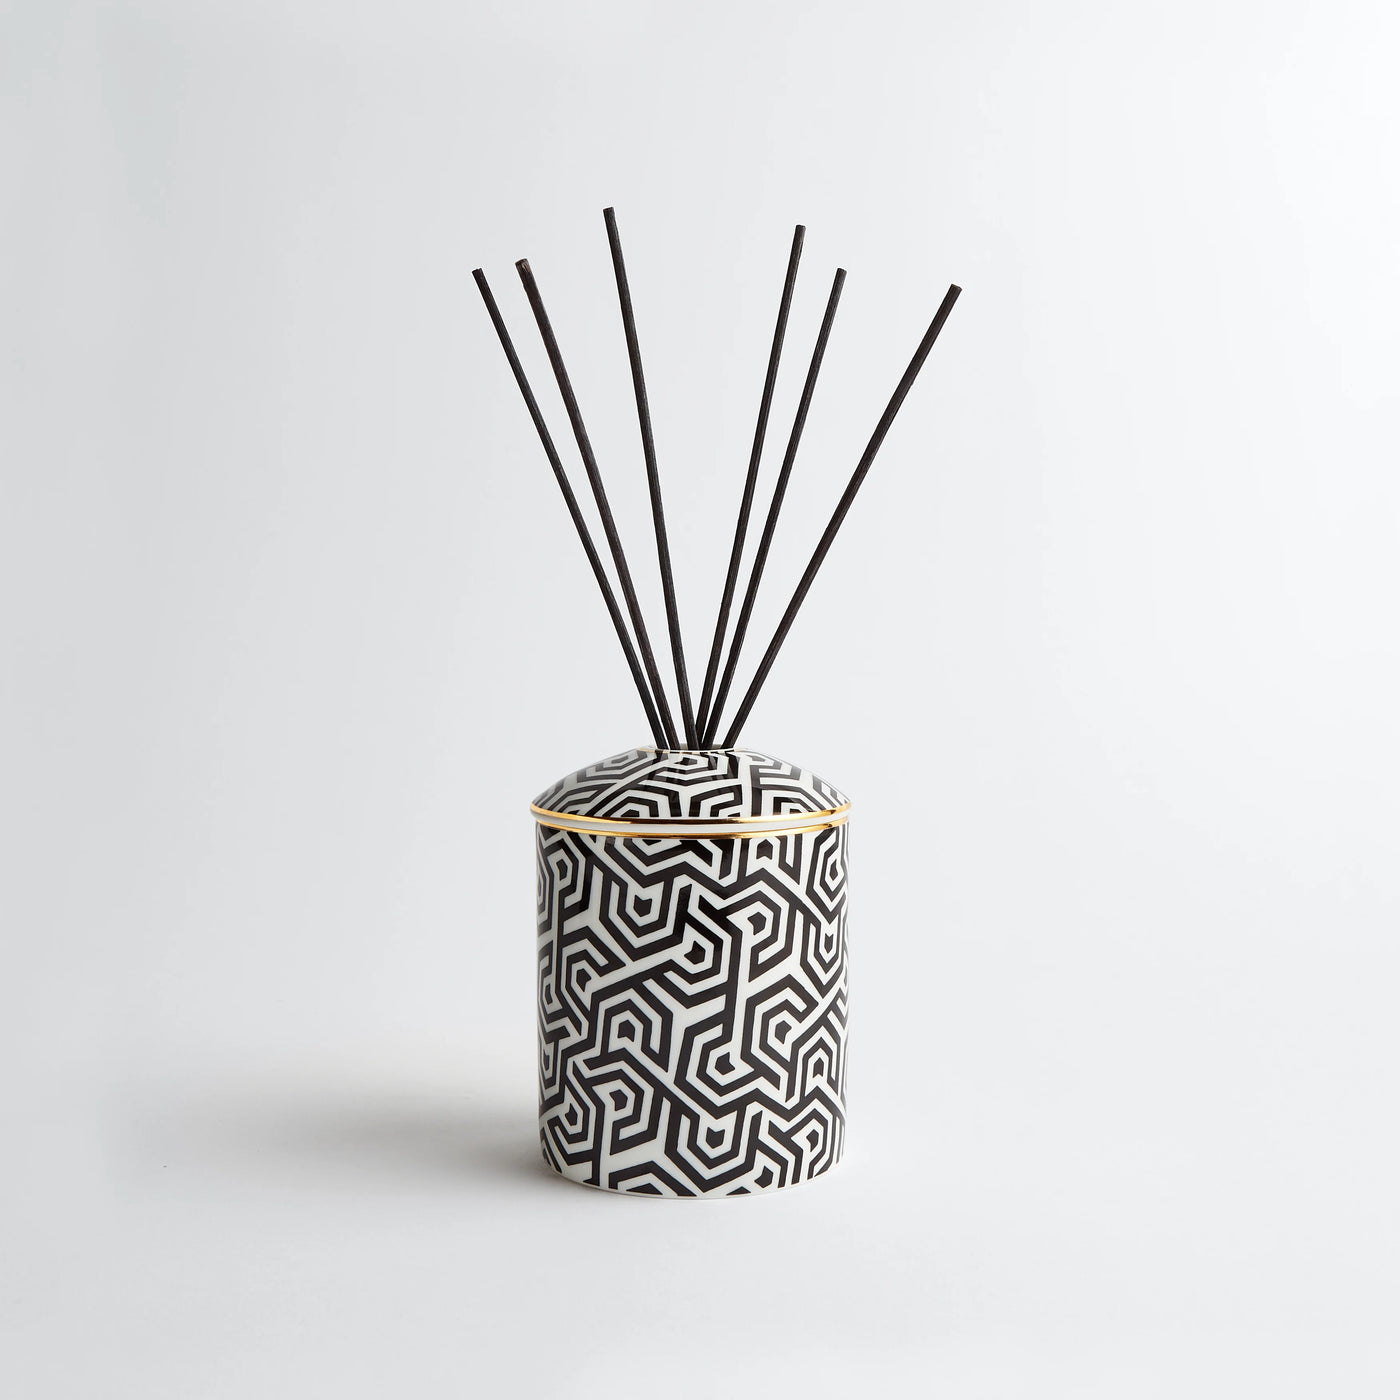 Maison Splendid fine bone china diffuser in black and white geometric design with number five fragrance floral scent